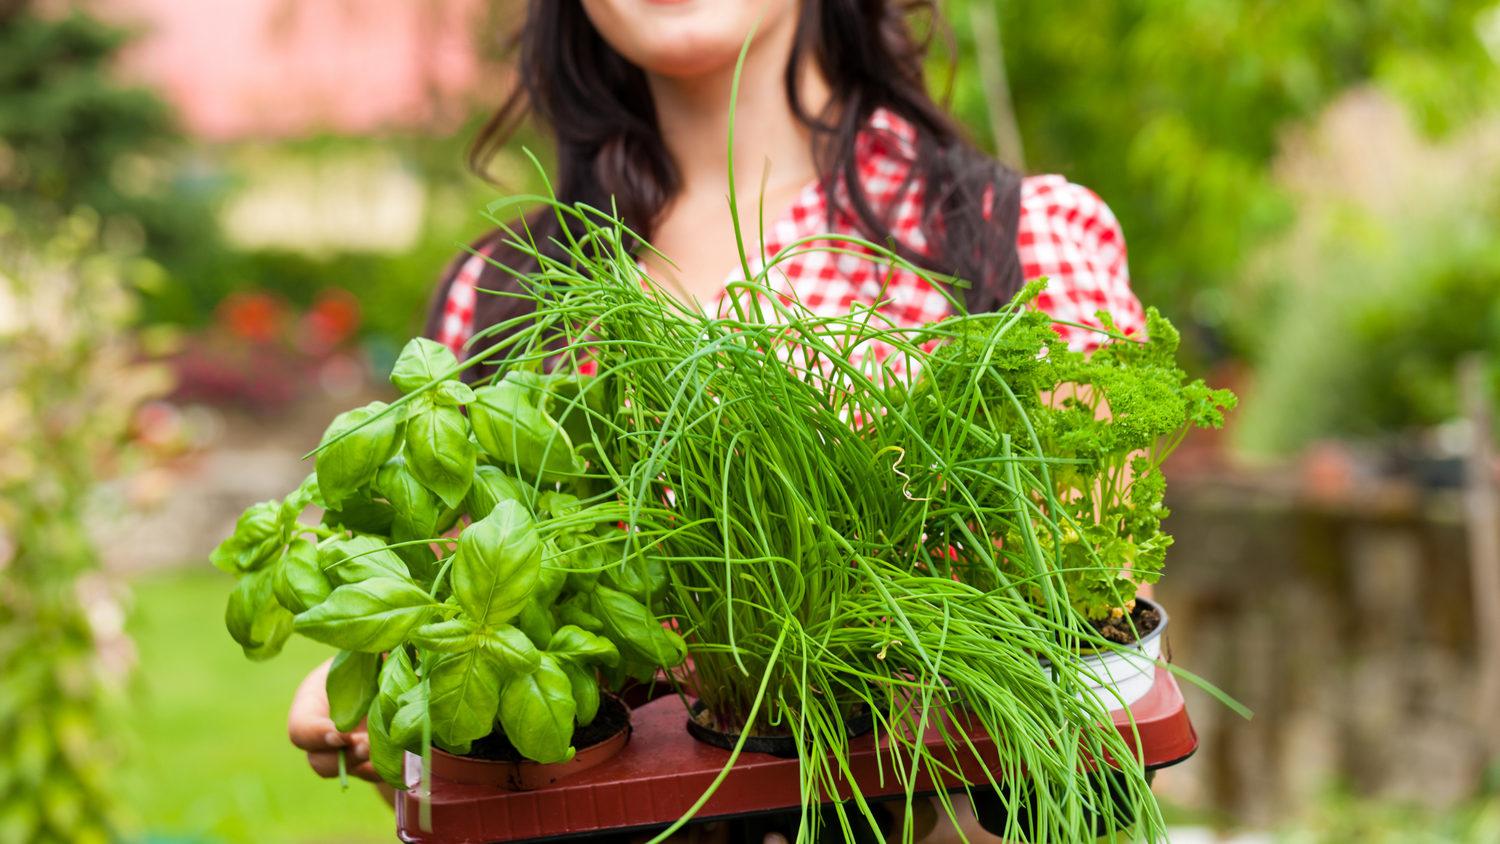 Harvesting and Storing Homegrown Herbs